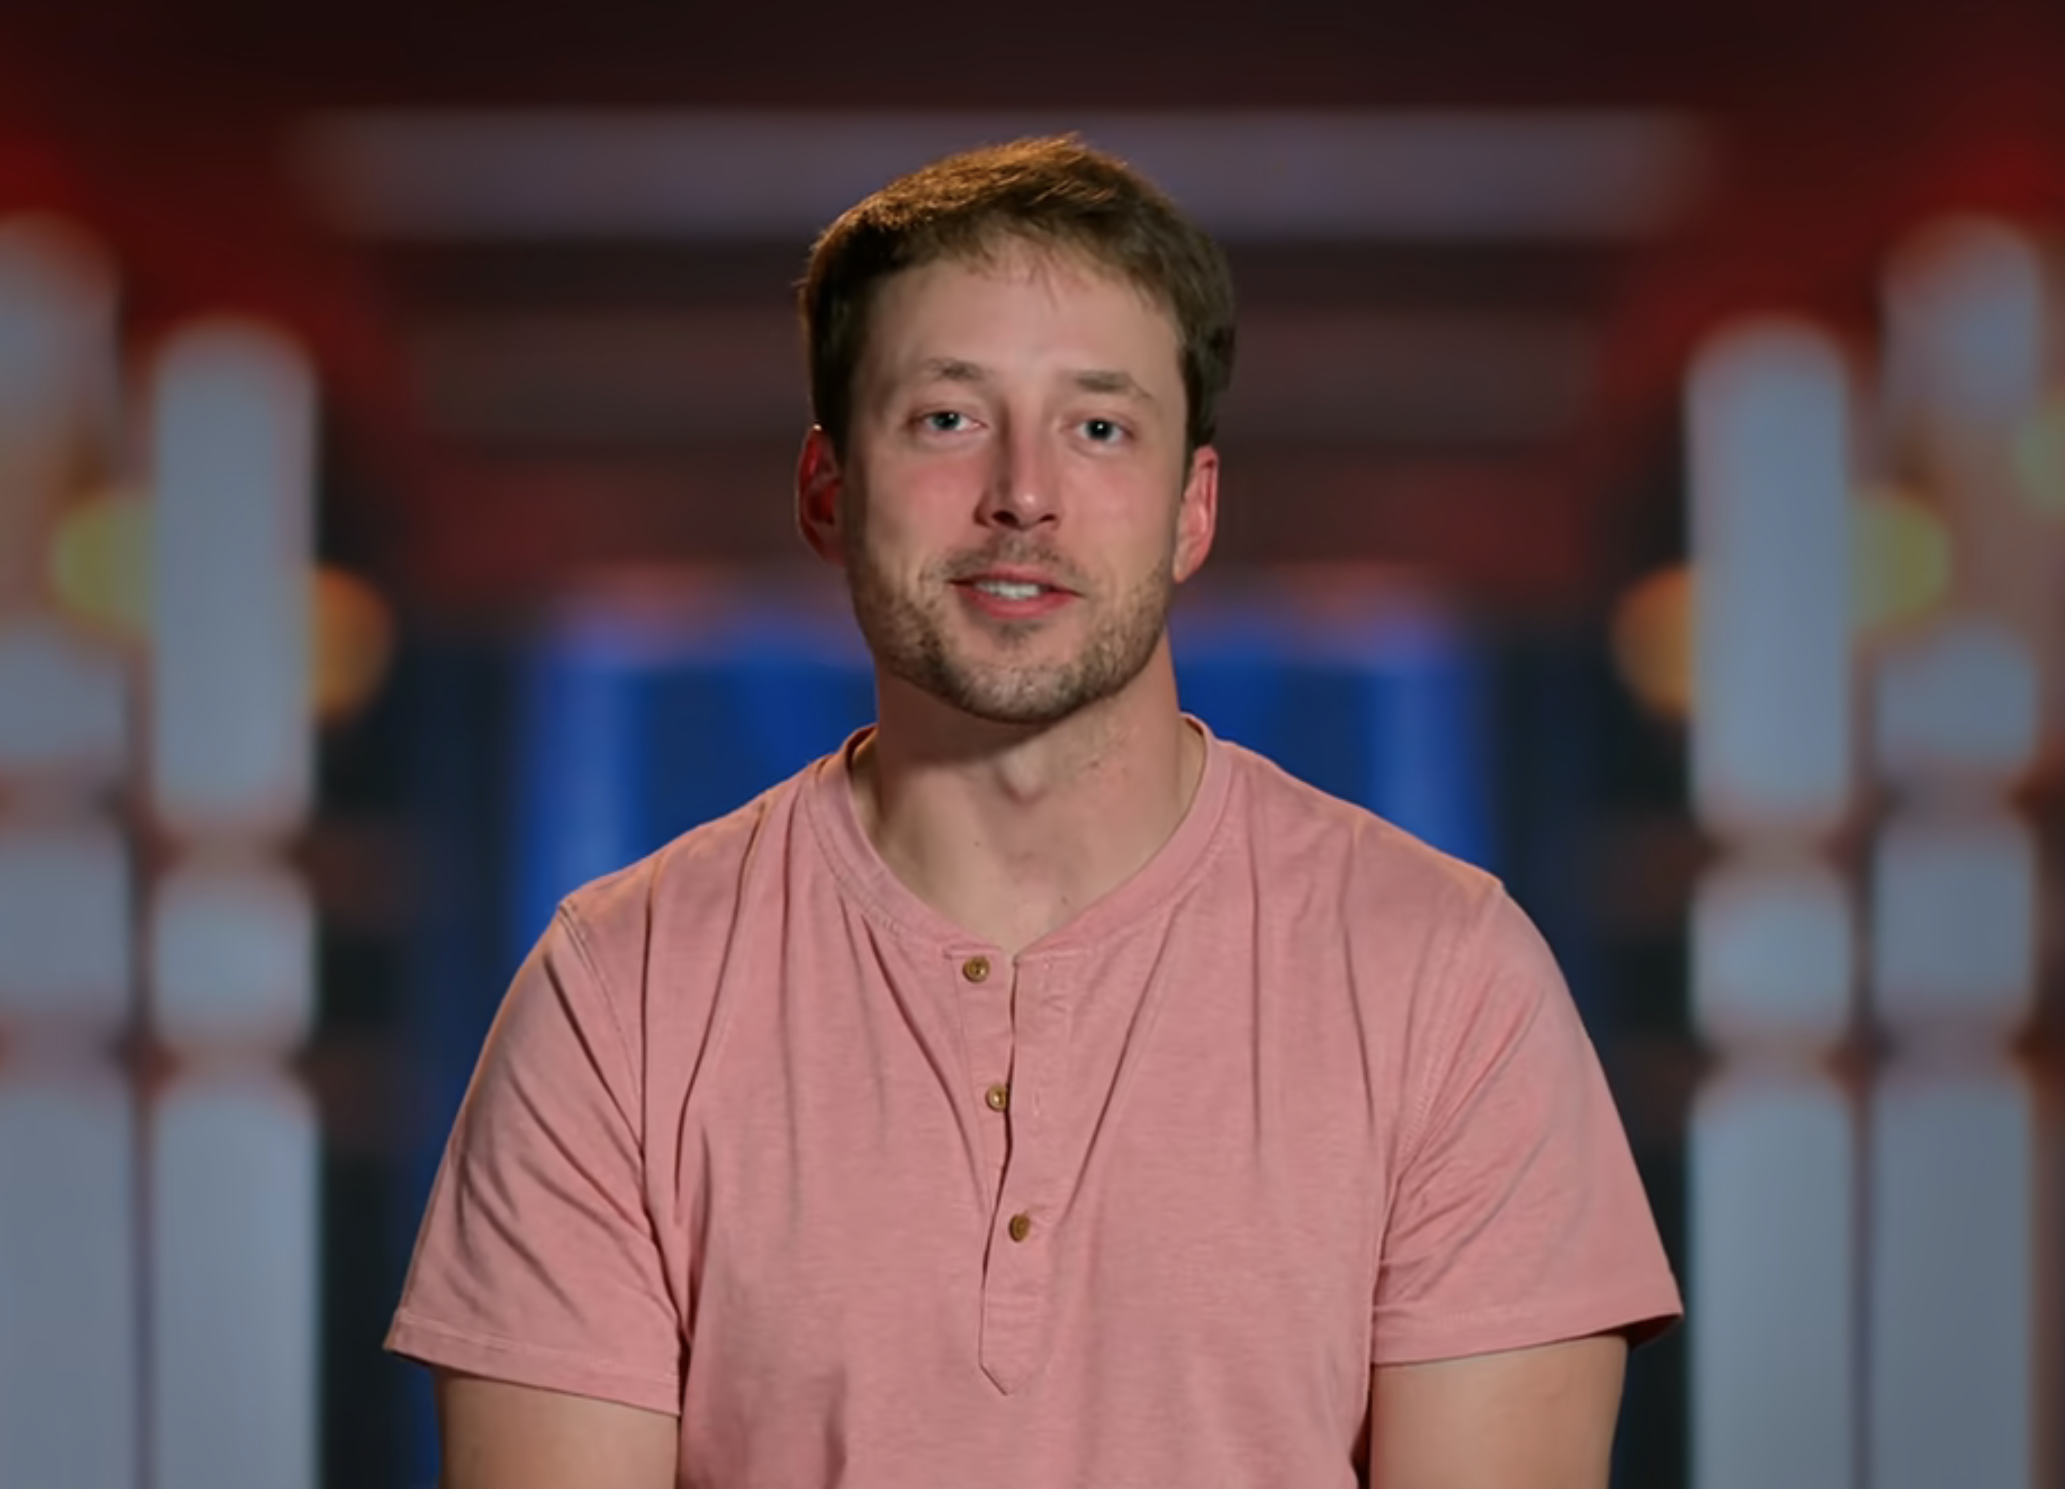 Jeremy in a casual t-shirt smiling at the camera with a blurred background